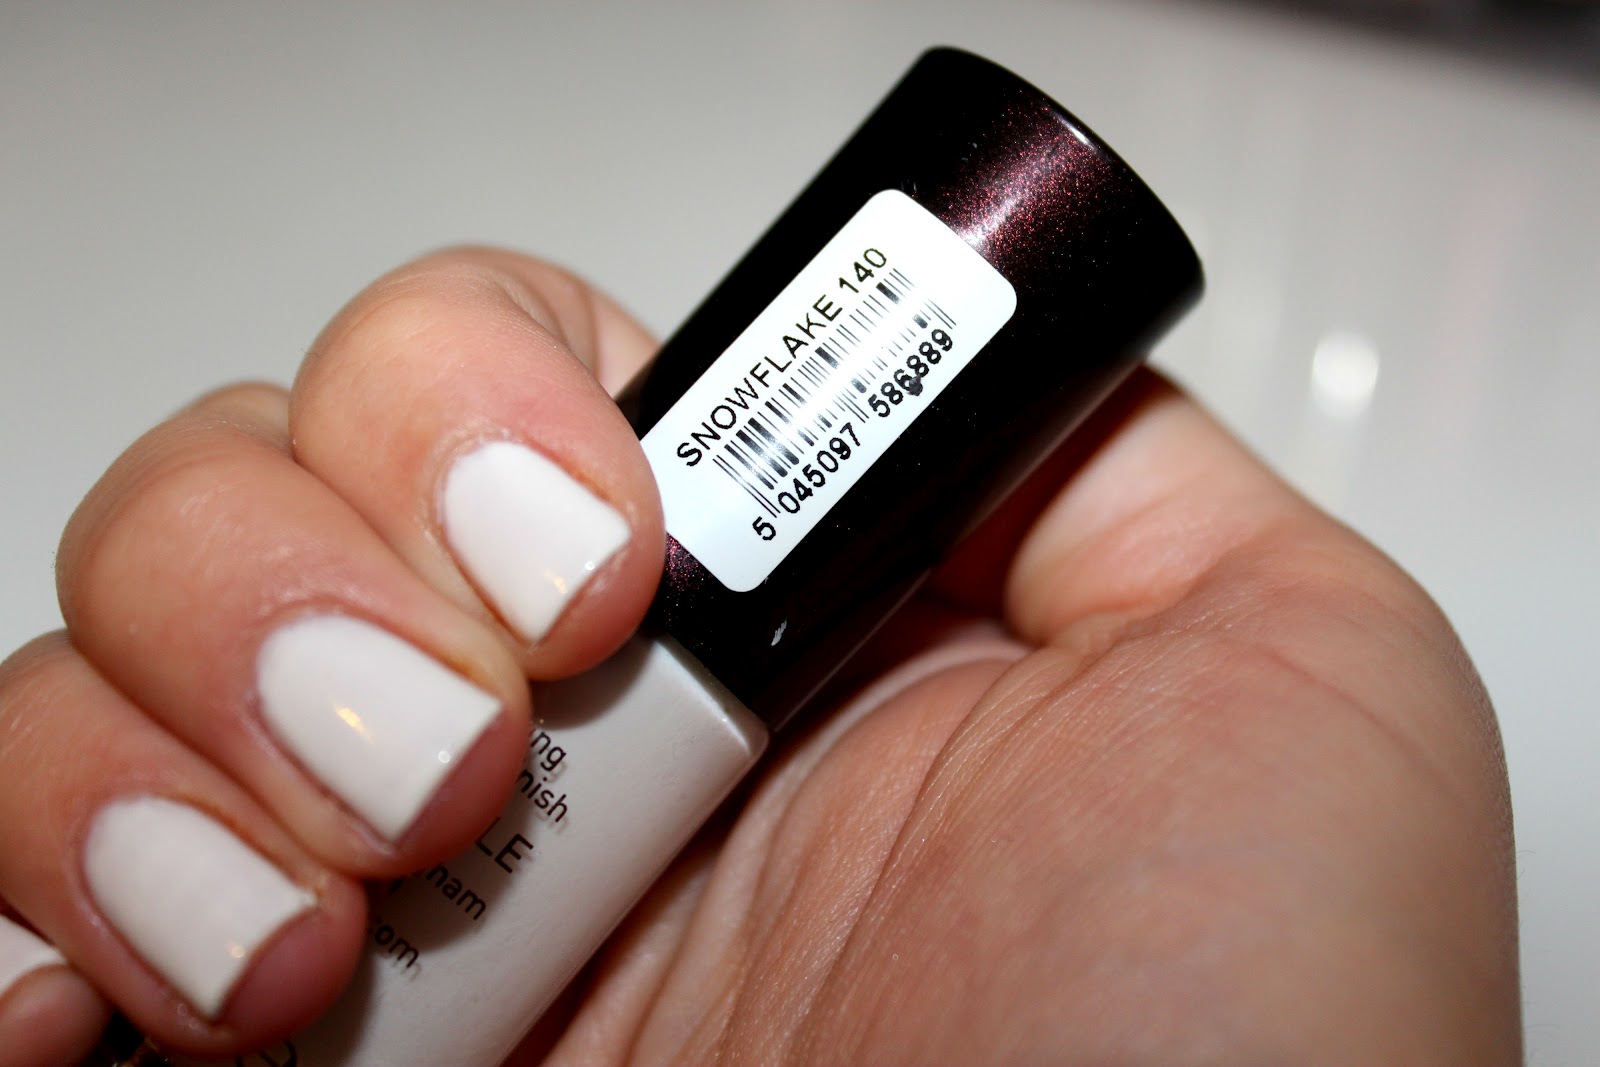 7. "Nail polish with gem accents" - wide 8